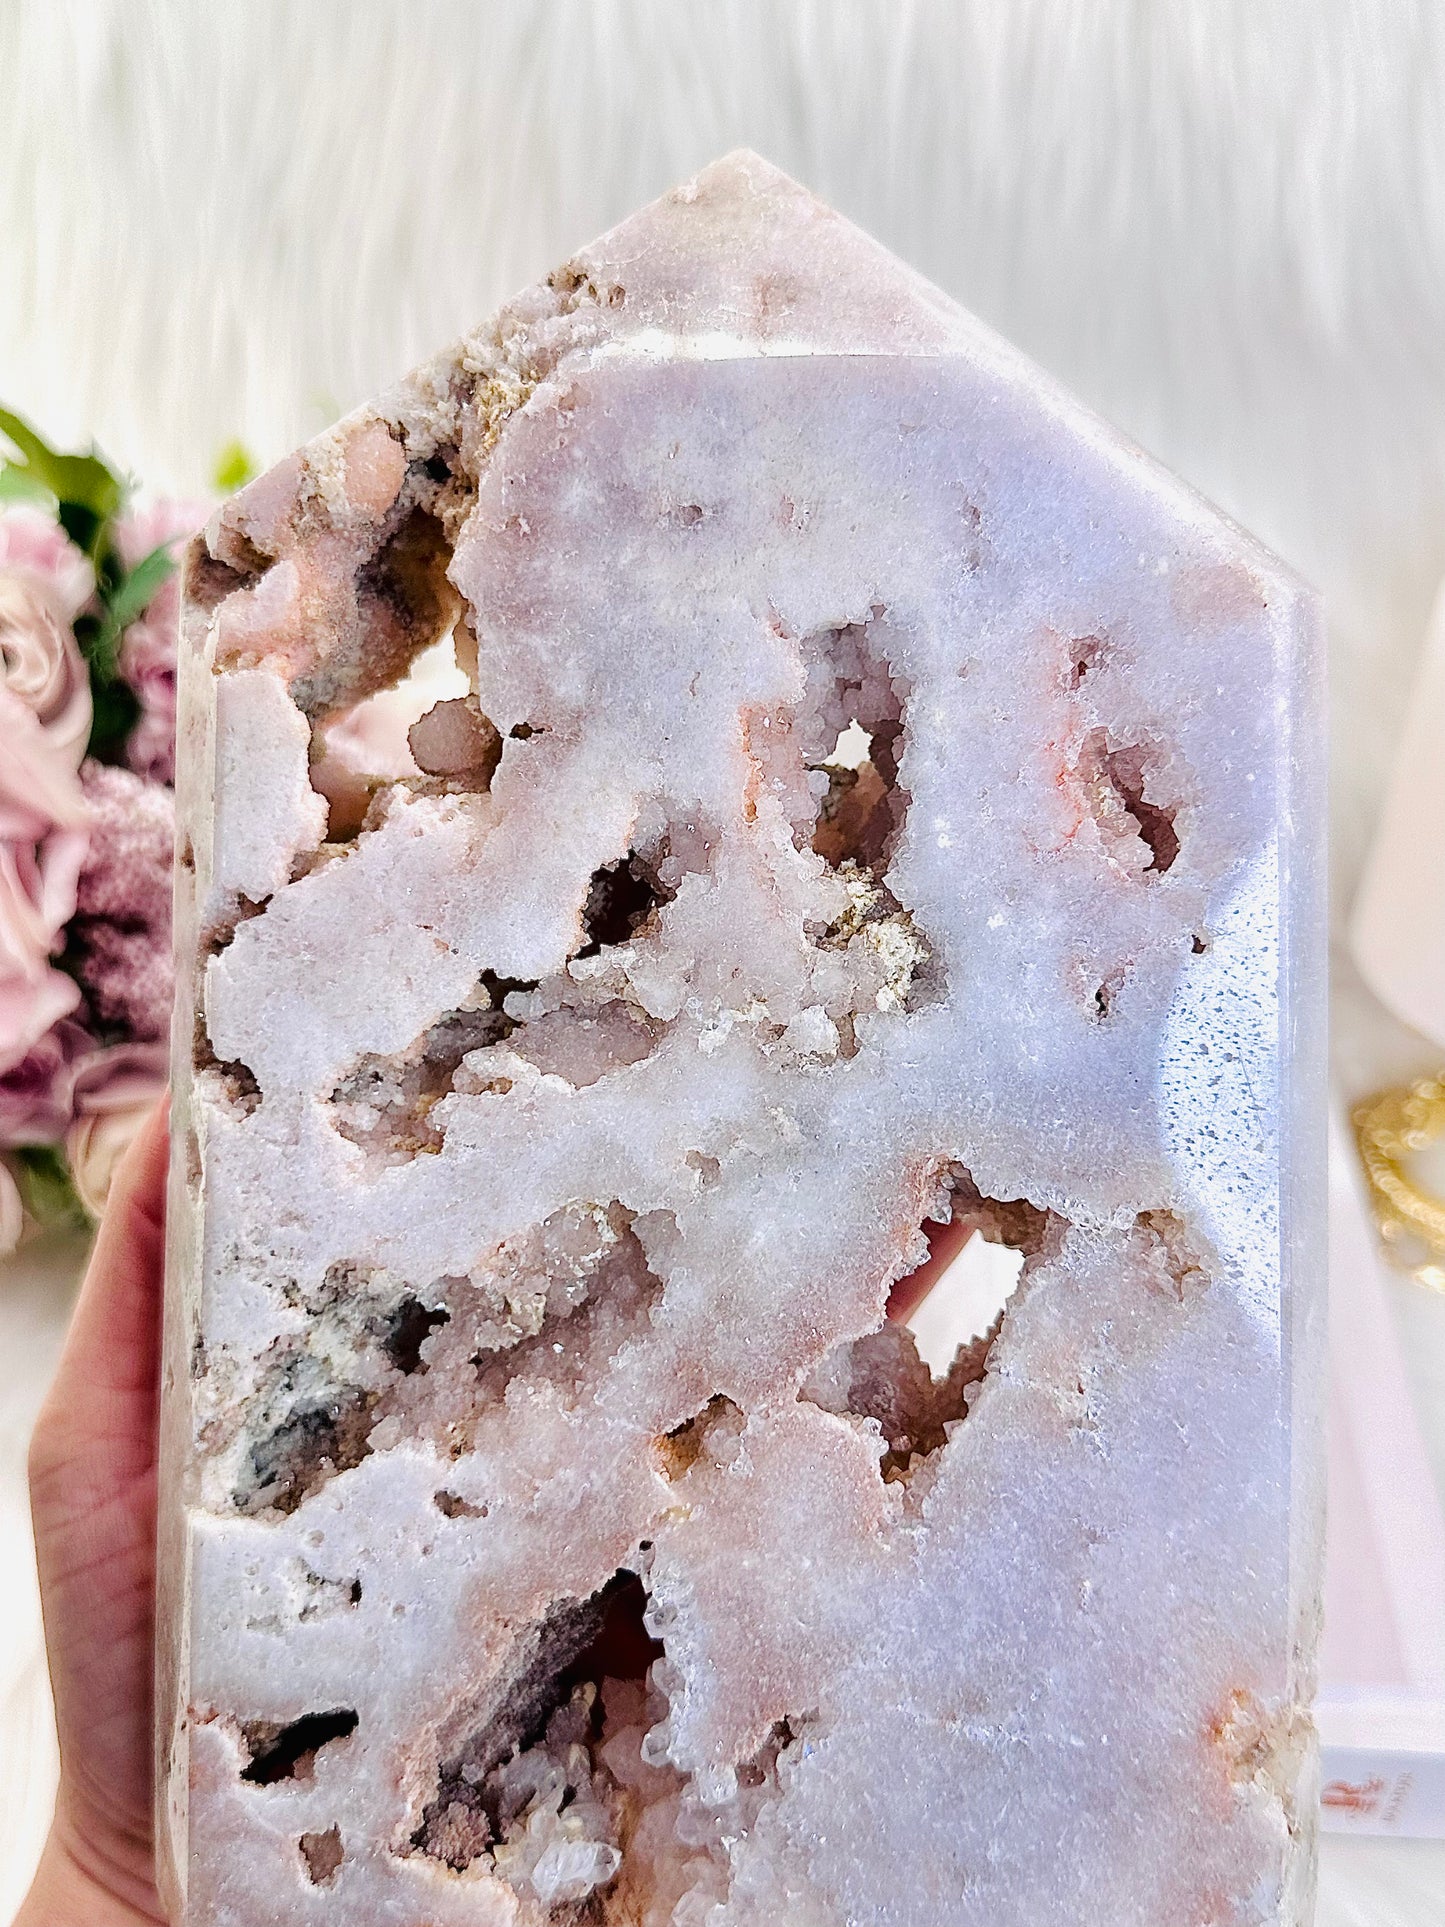 ⚜️ SALE ⚜️Fabulous New Large 1.42KG 20cm Tall Druzy Pink Amethyst Tower From Uruguay Absolutely Incredible